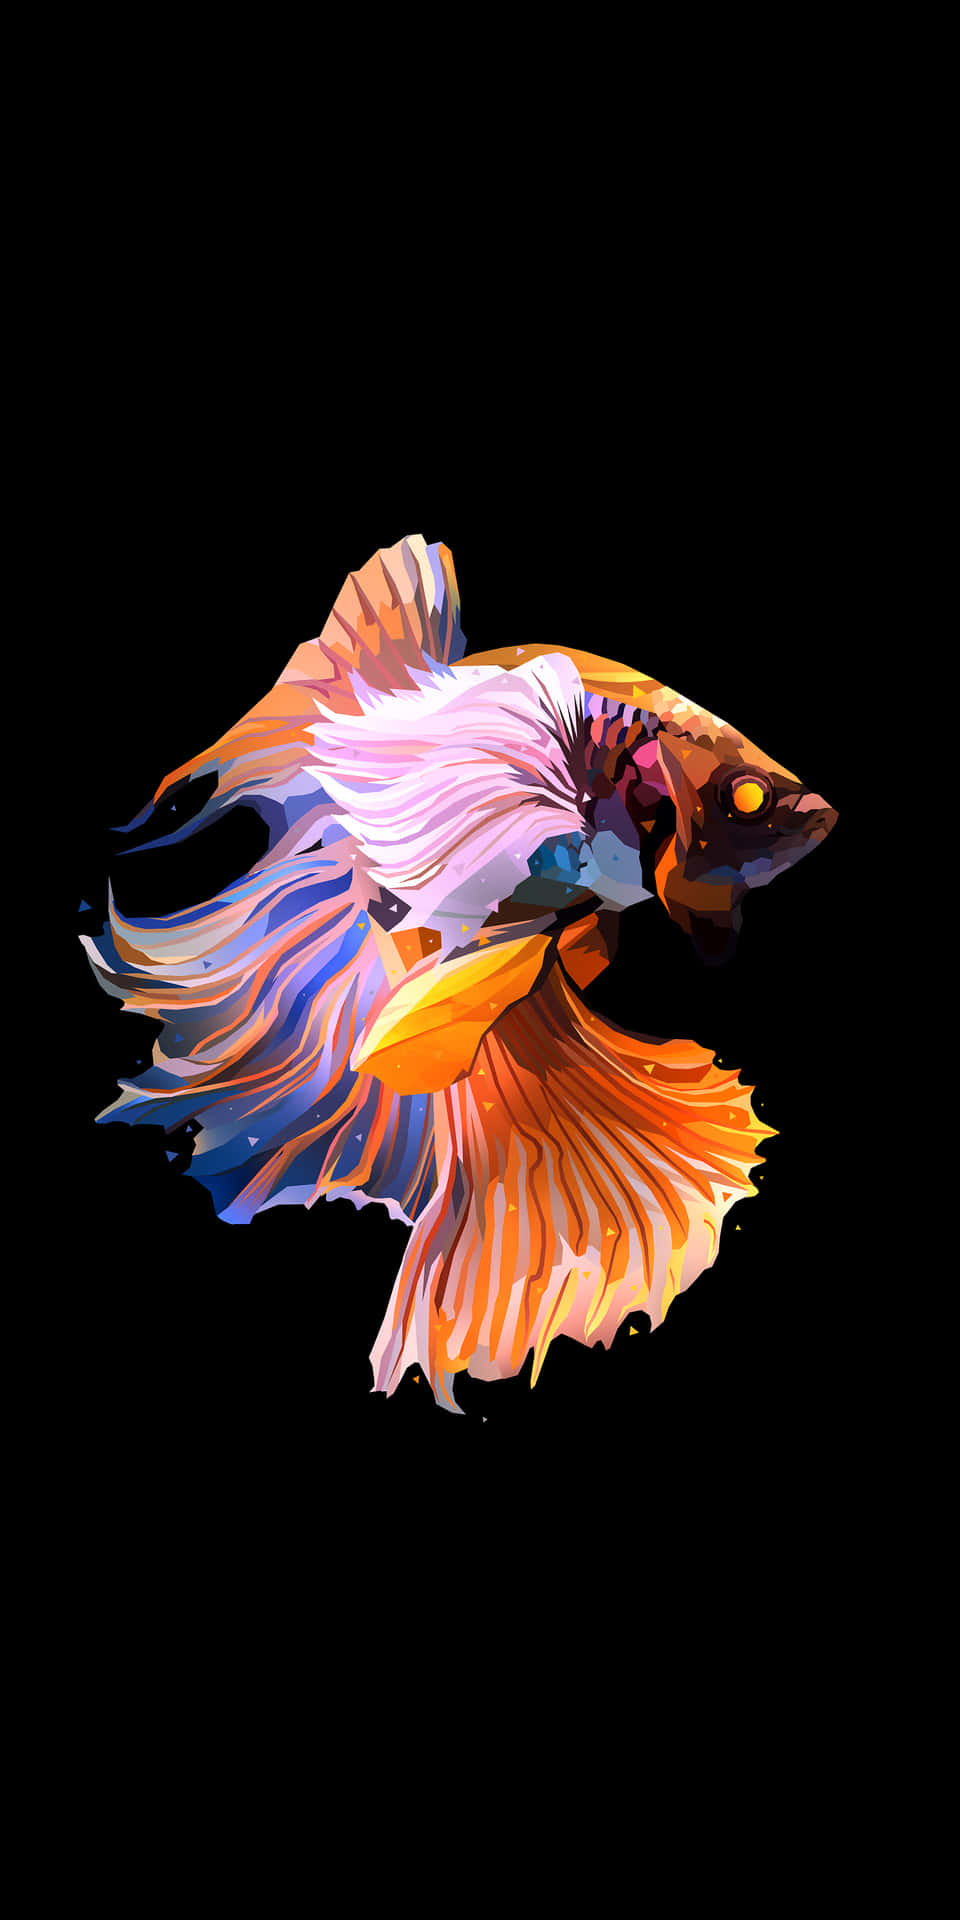 An underwater background featuring a colourful fish.